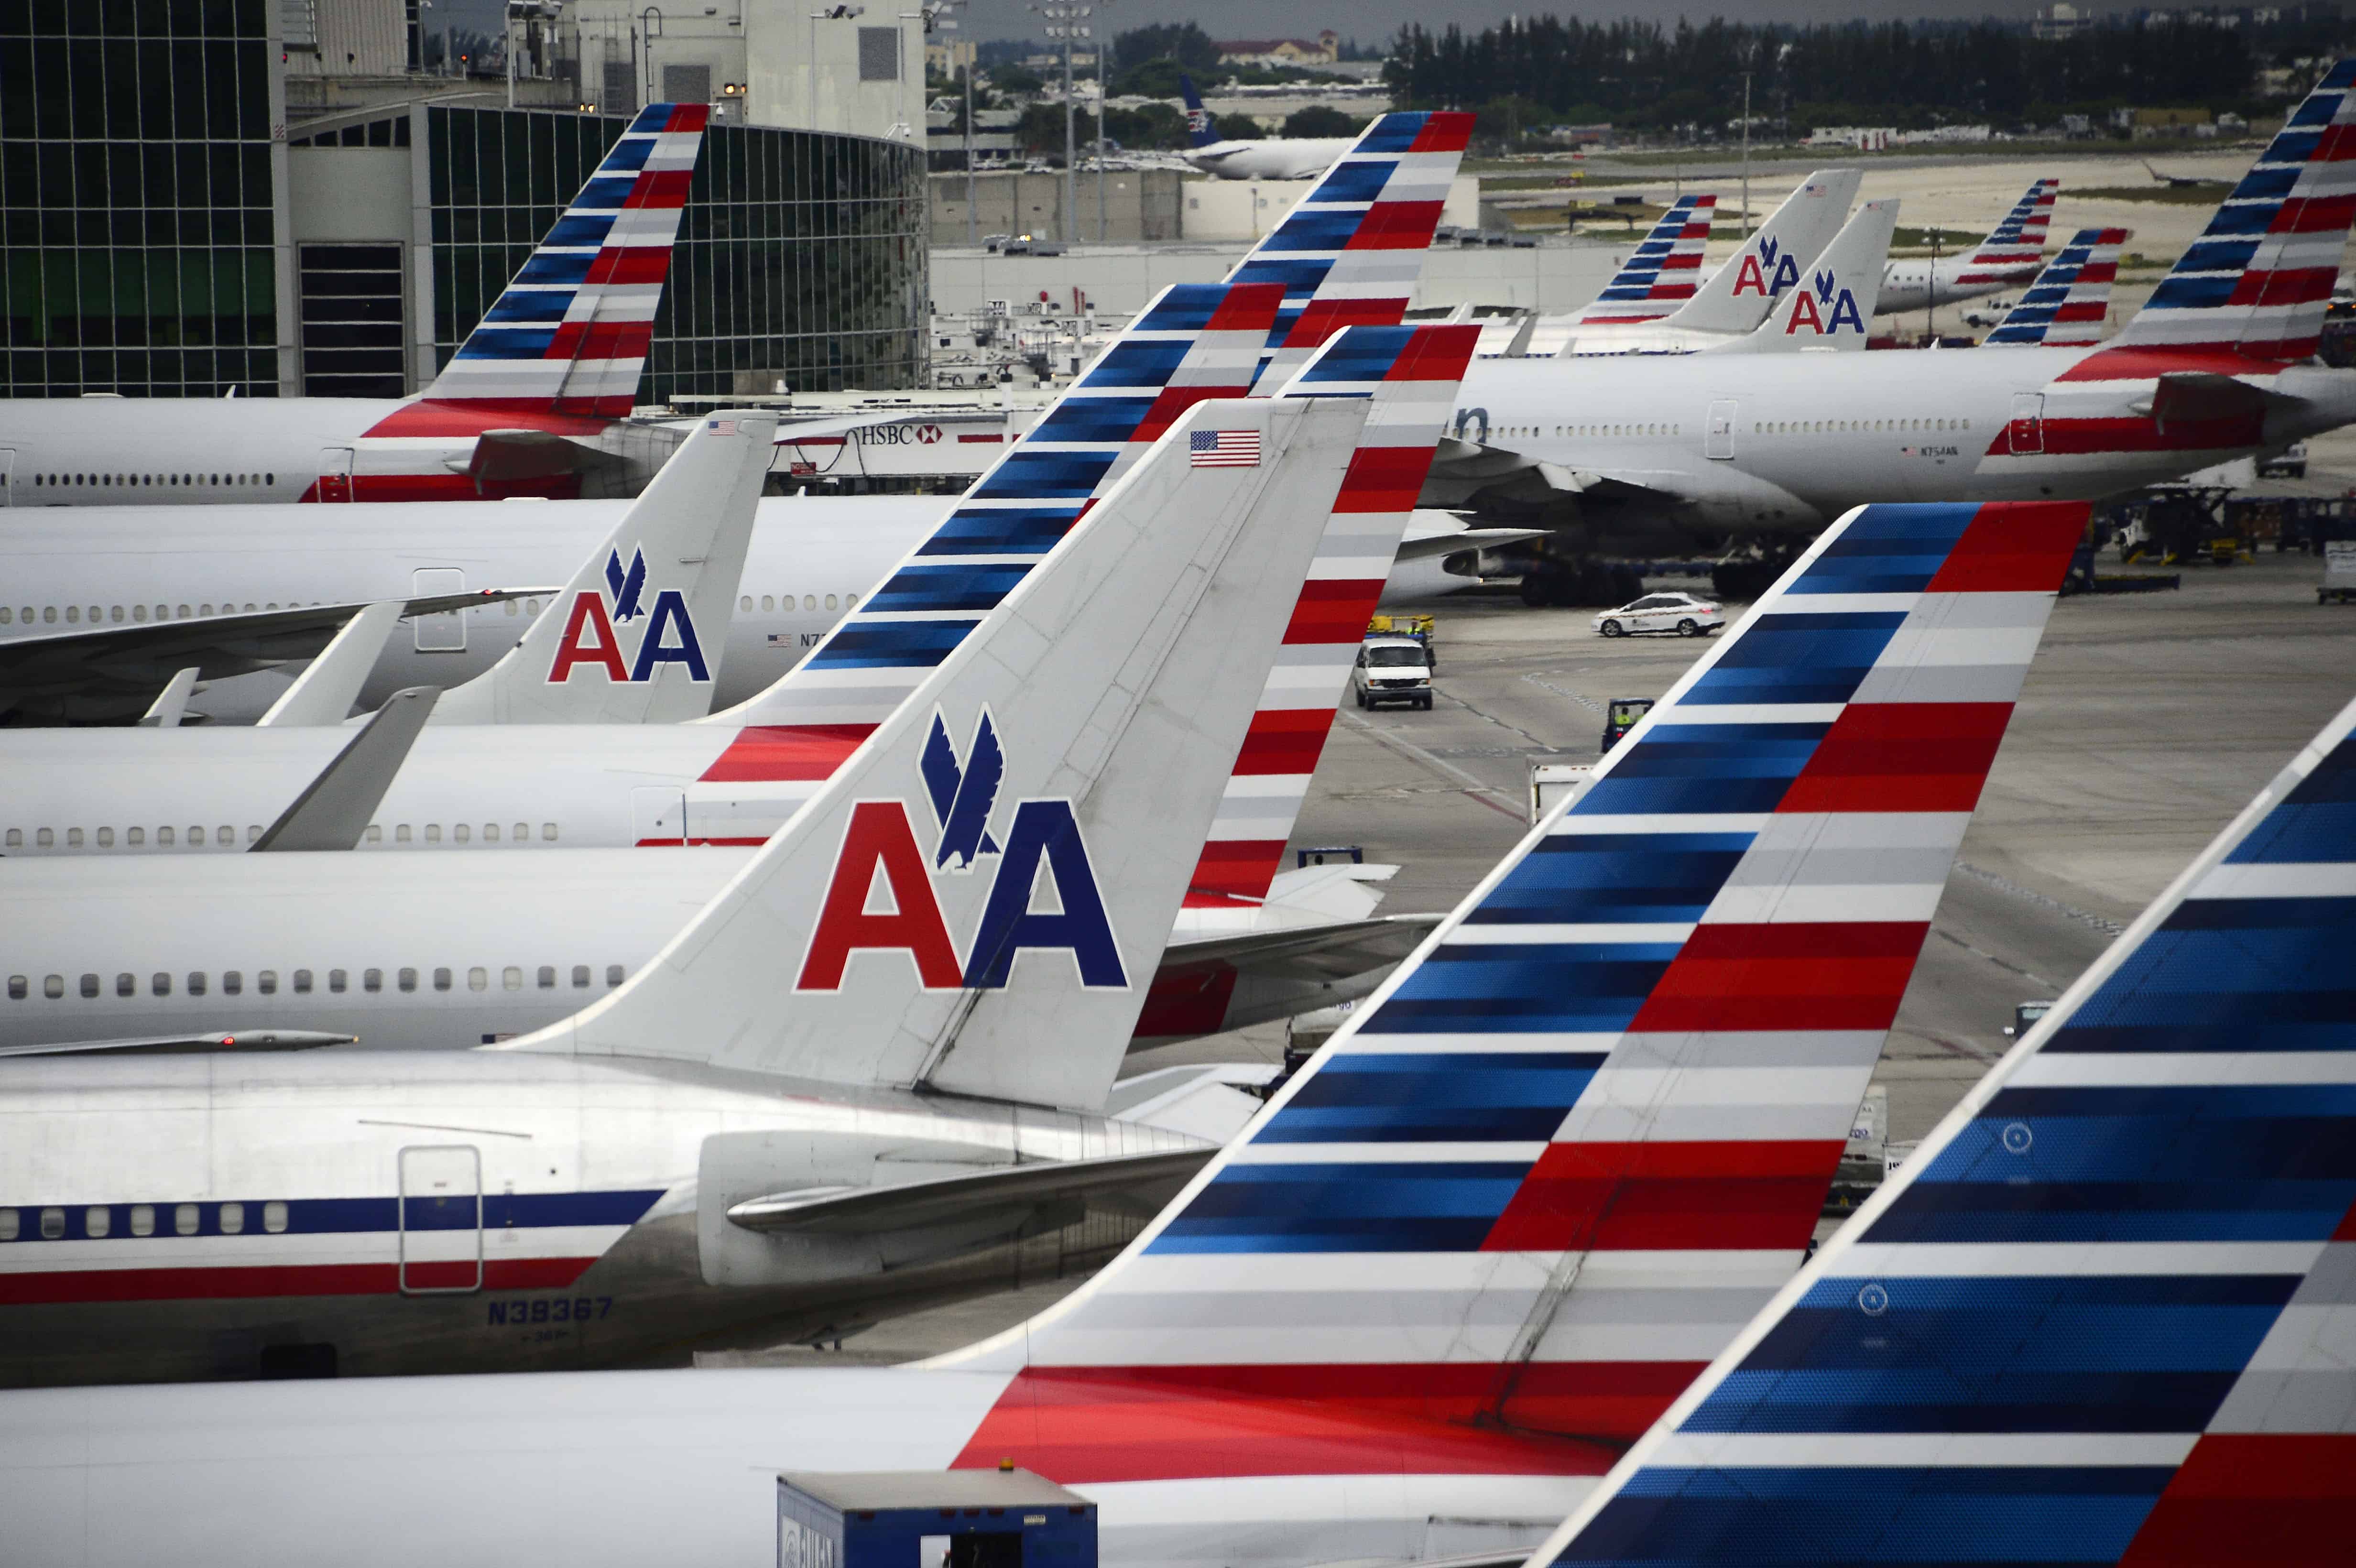 American Airlines planes stand on the tarmac at Miami International Airport.